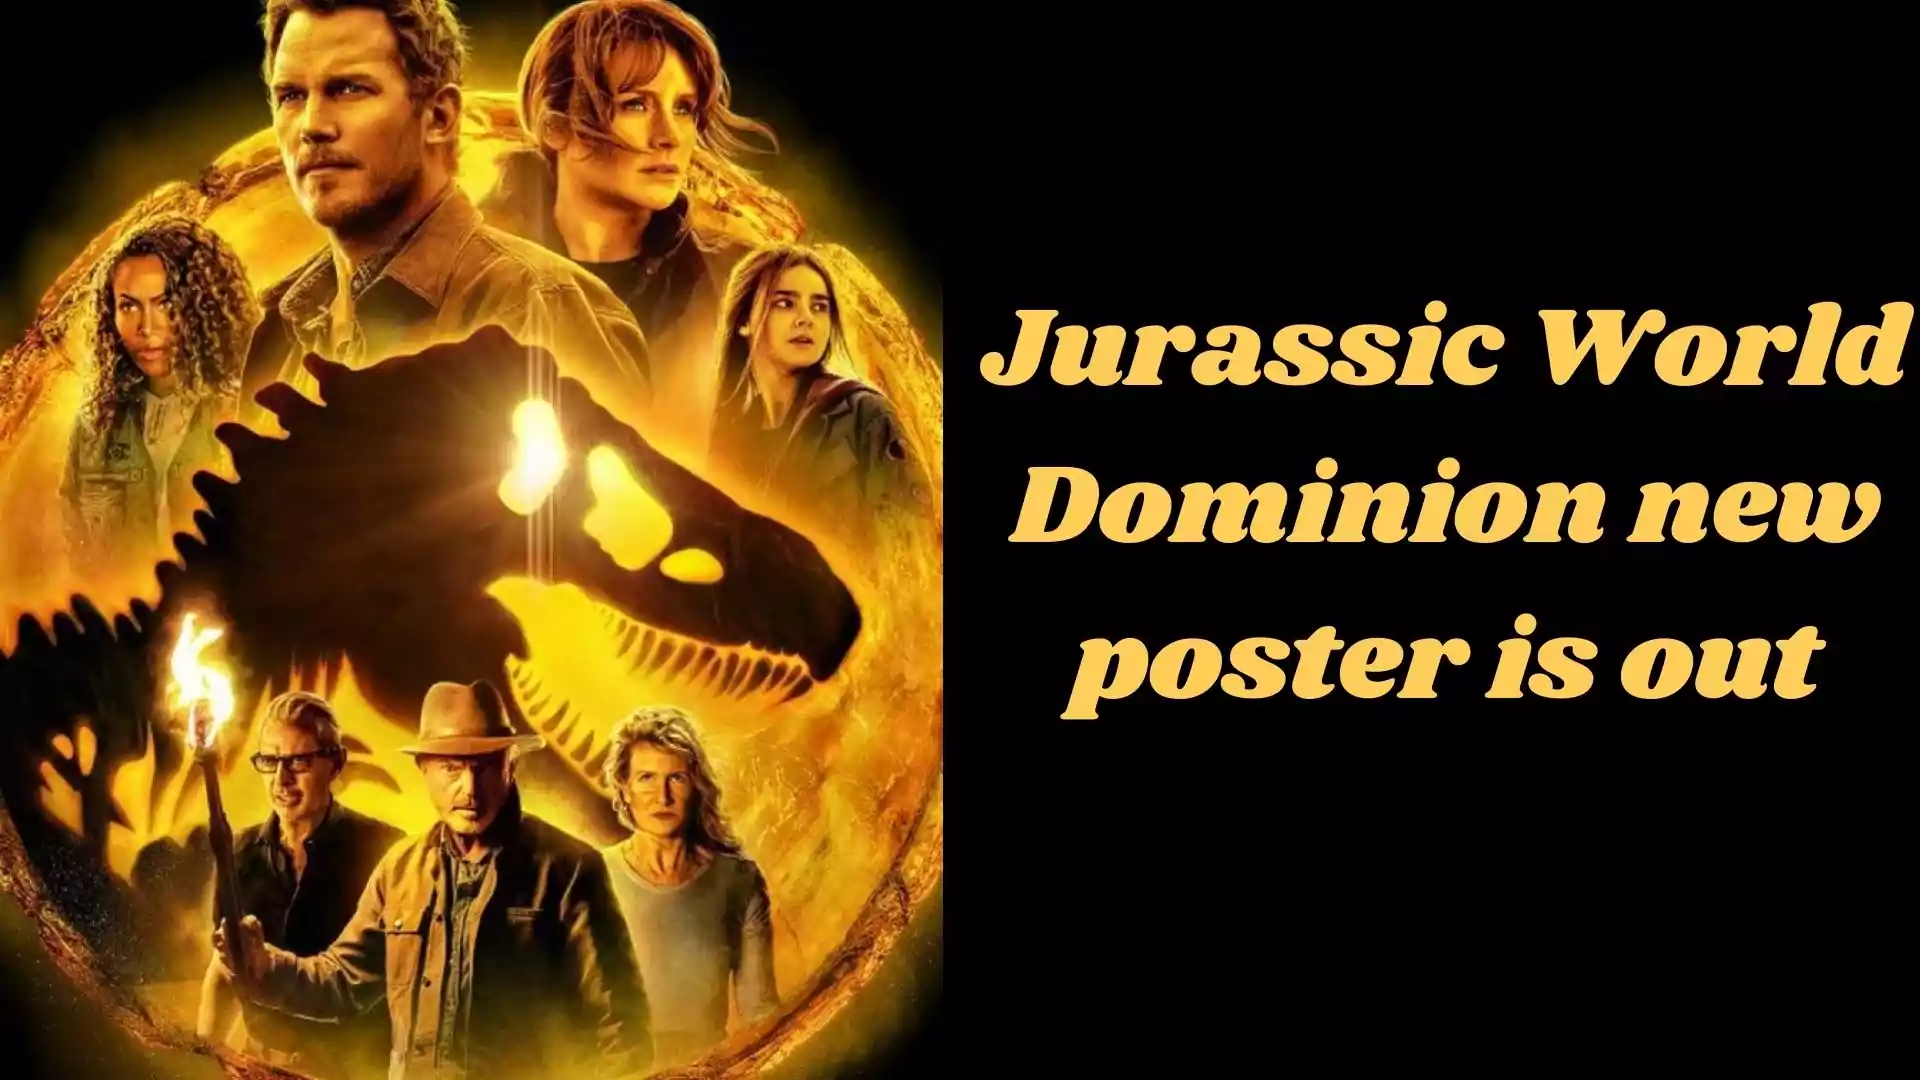 Jurassic World Dominion new poster is out wallpaper and images